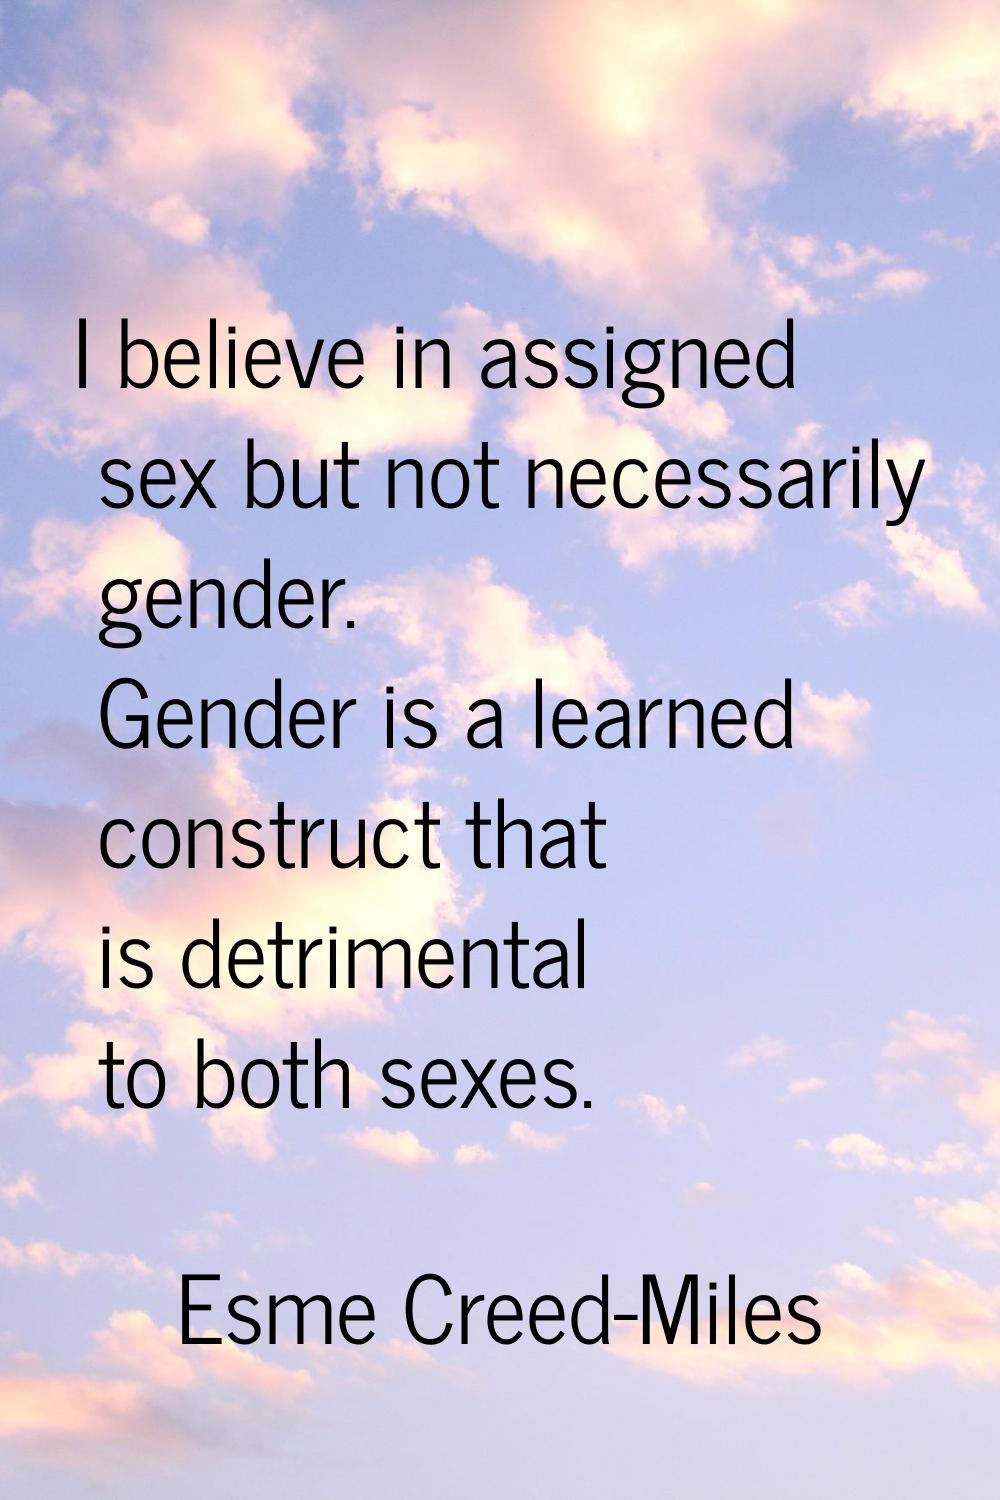 I believe in assigned sex but not necessarily gender. Gender is a learned construct that is detrime